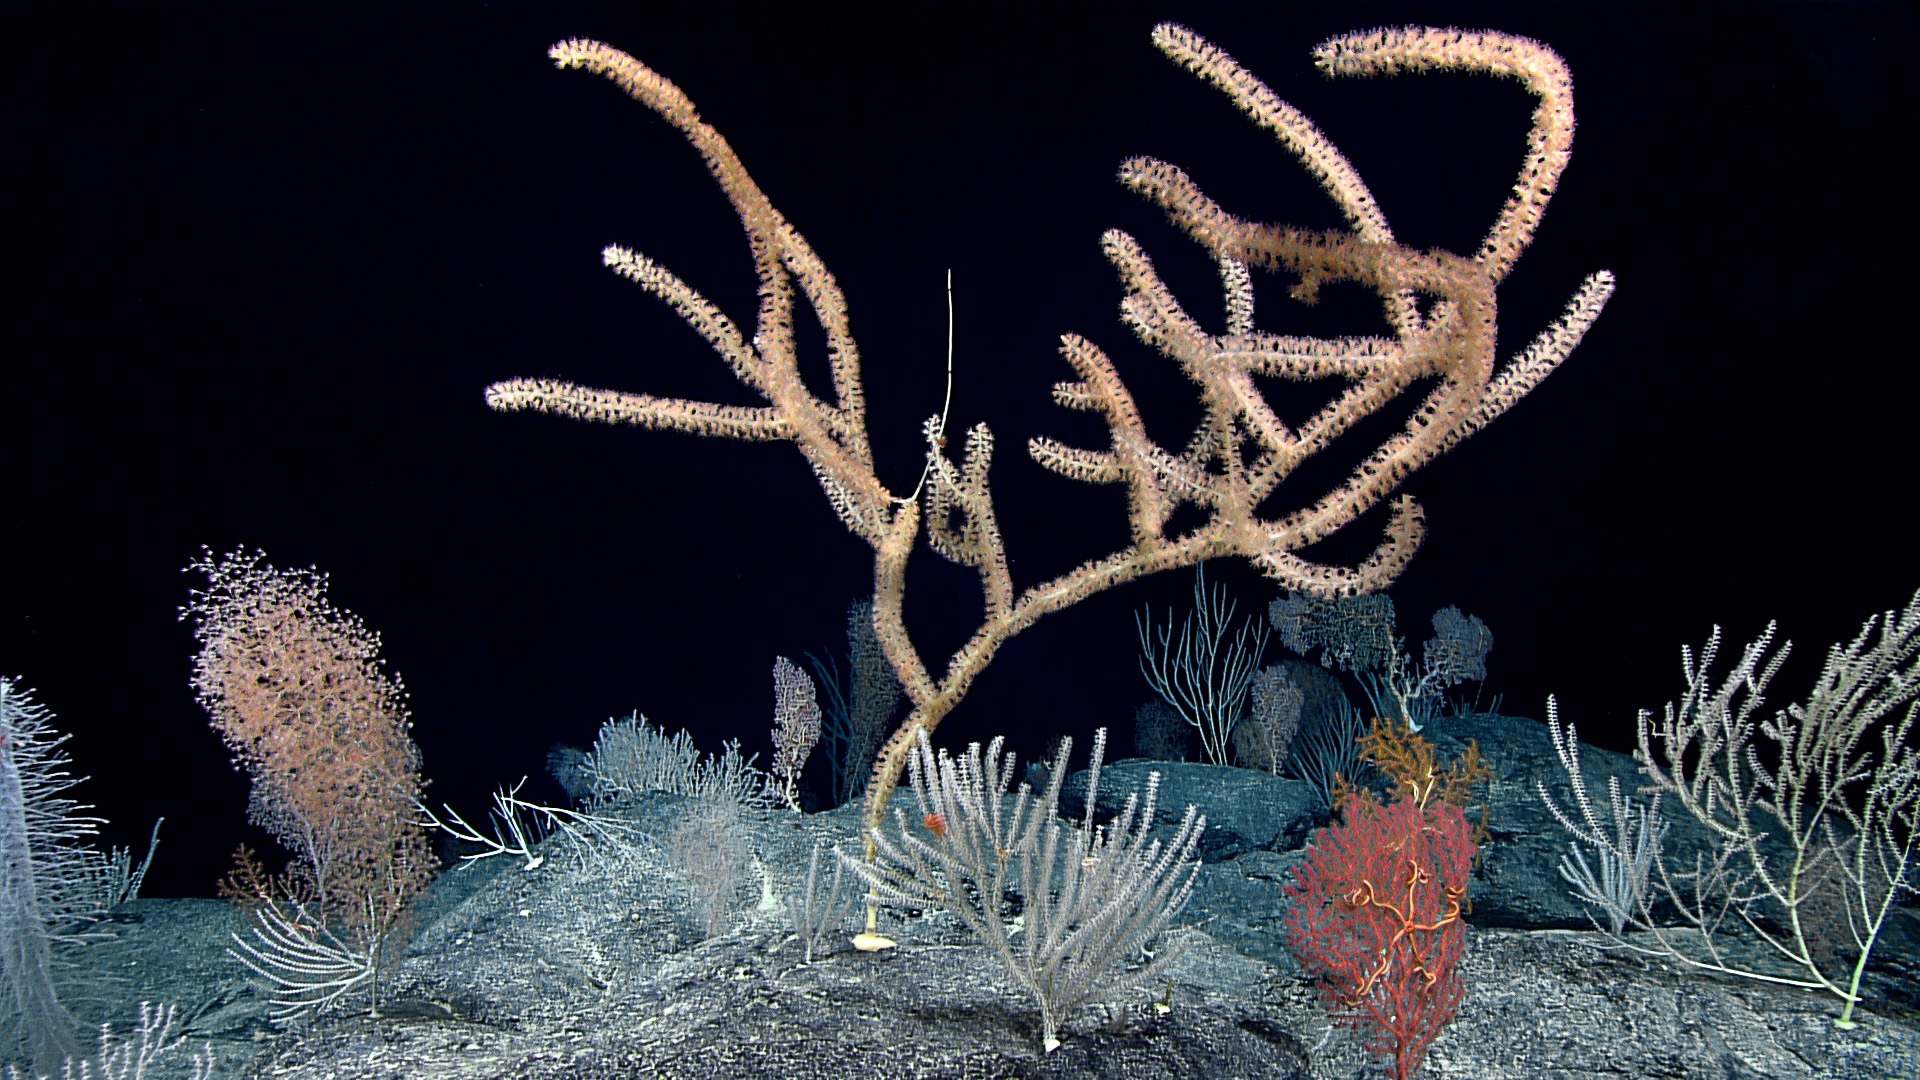 A-Diversity-of-Bamboo-Corals-and-Golden-Corals-in-the-Central-Pacific-Ocean.jpg